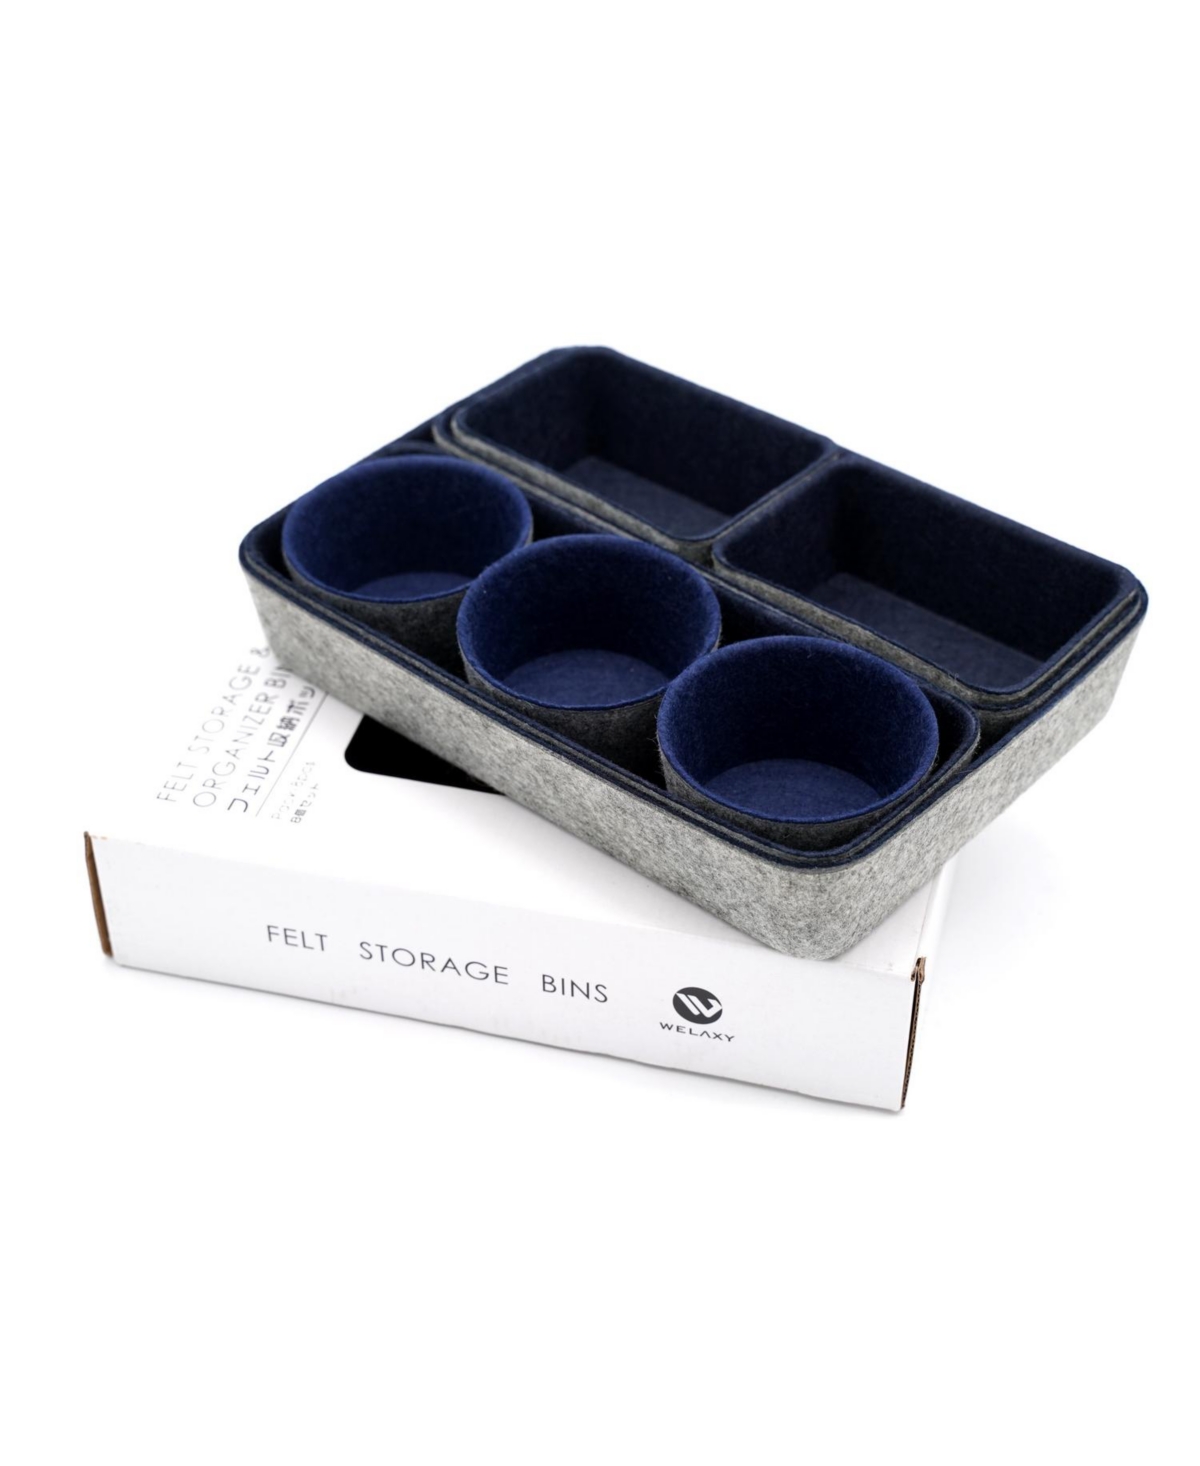 Welaxy 8 Piece Felt Drawer Organizer Set With Round Cups And Trays In Navy